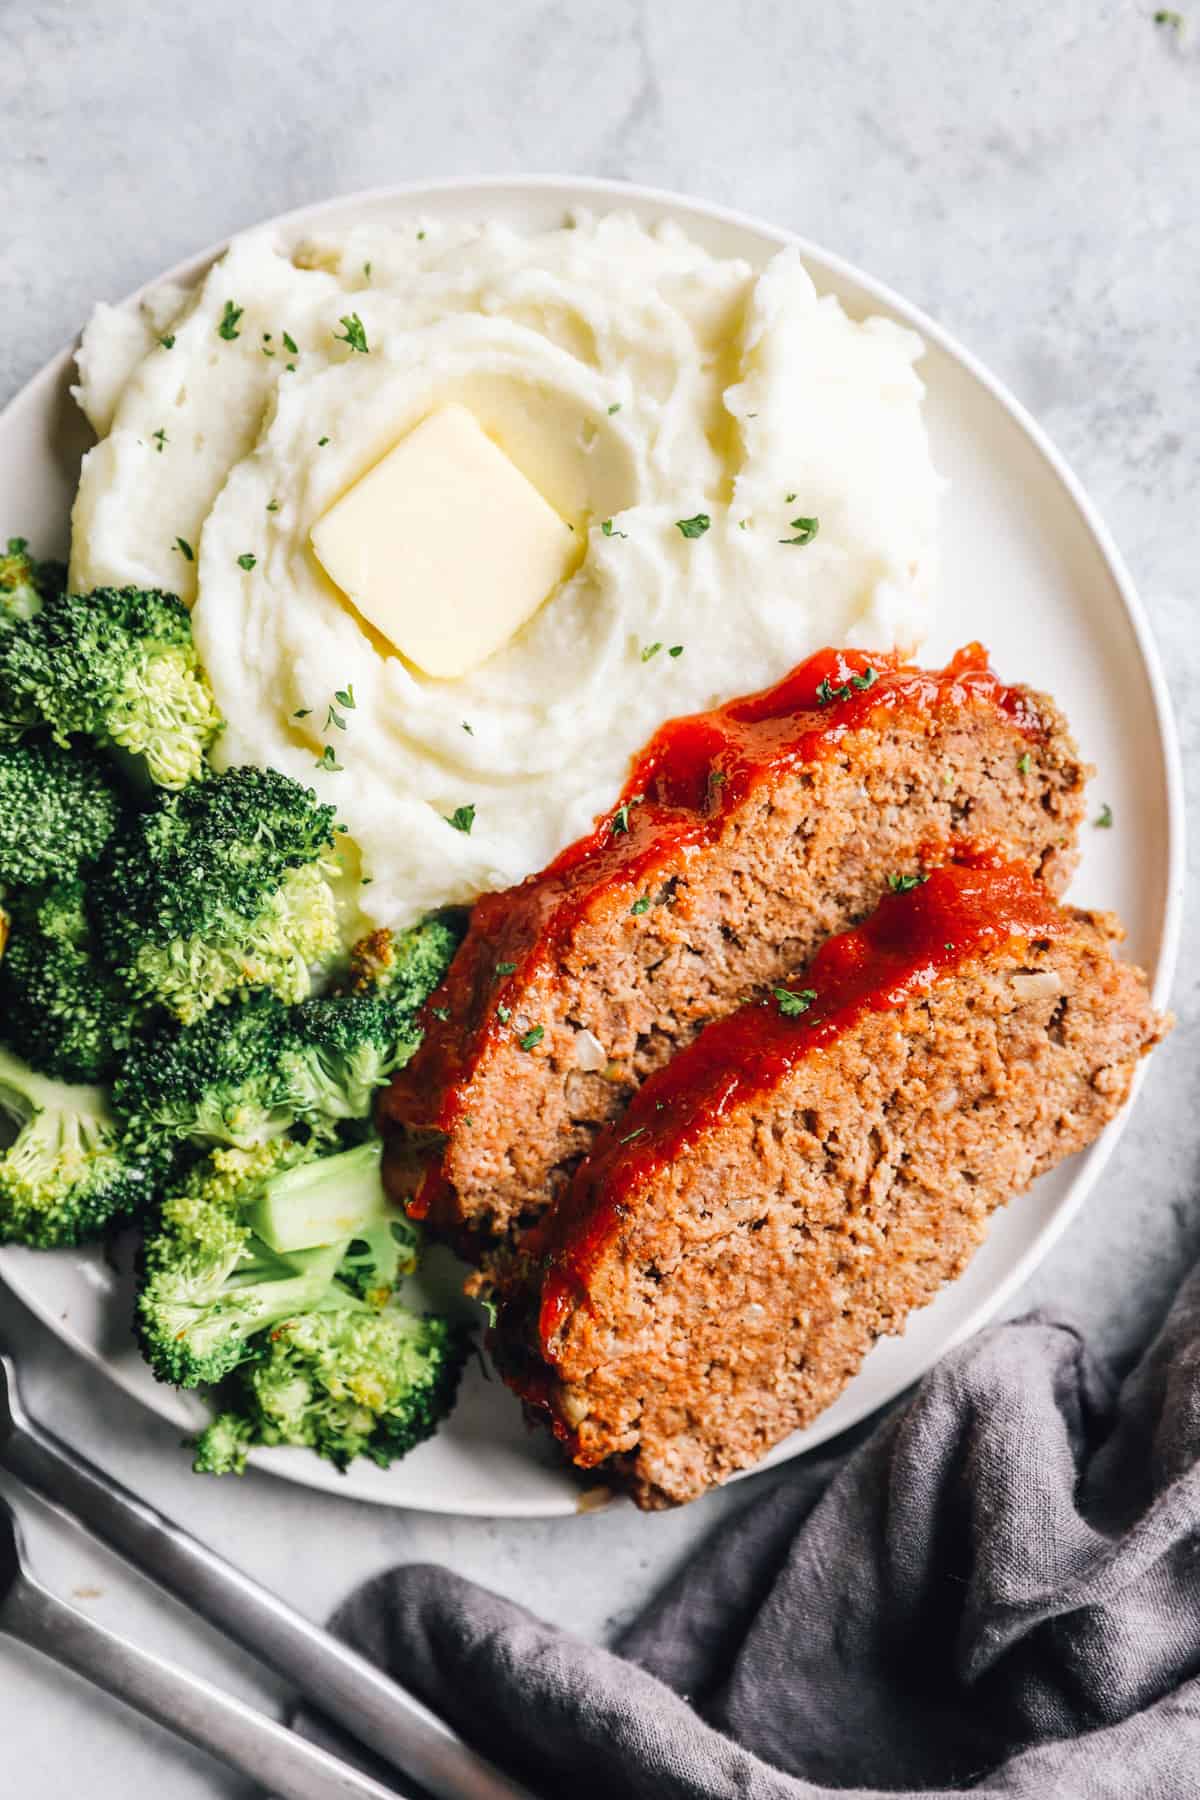 Overhead view of 2 slices of meatloaf on a white plate with broccoli and mashed potaotes.